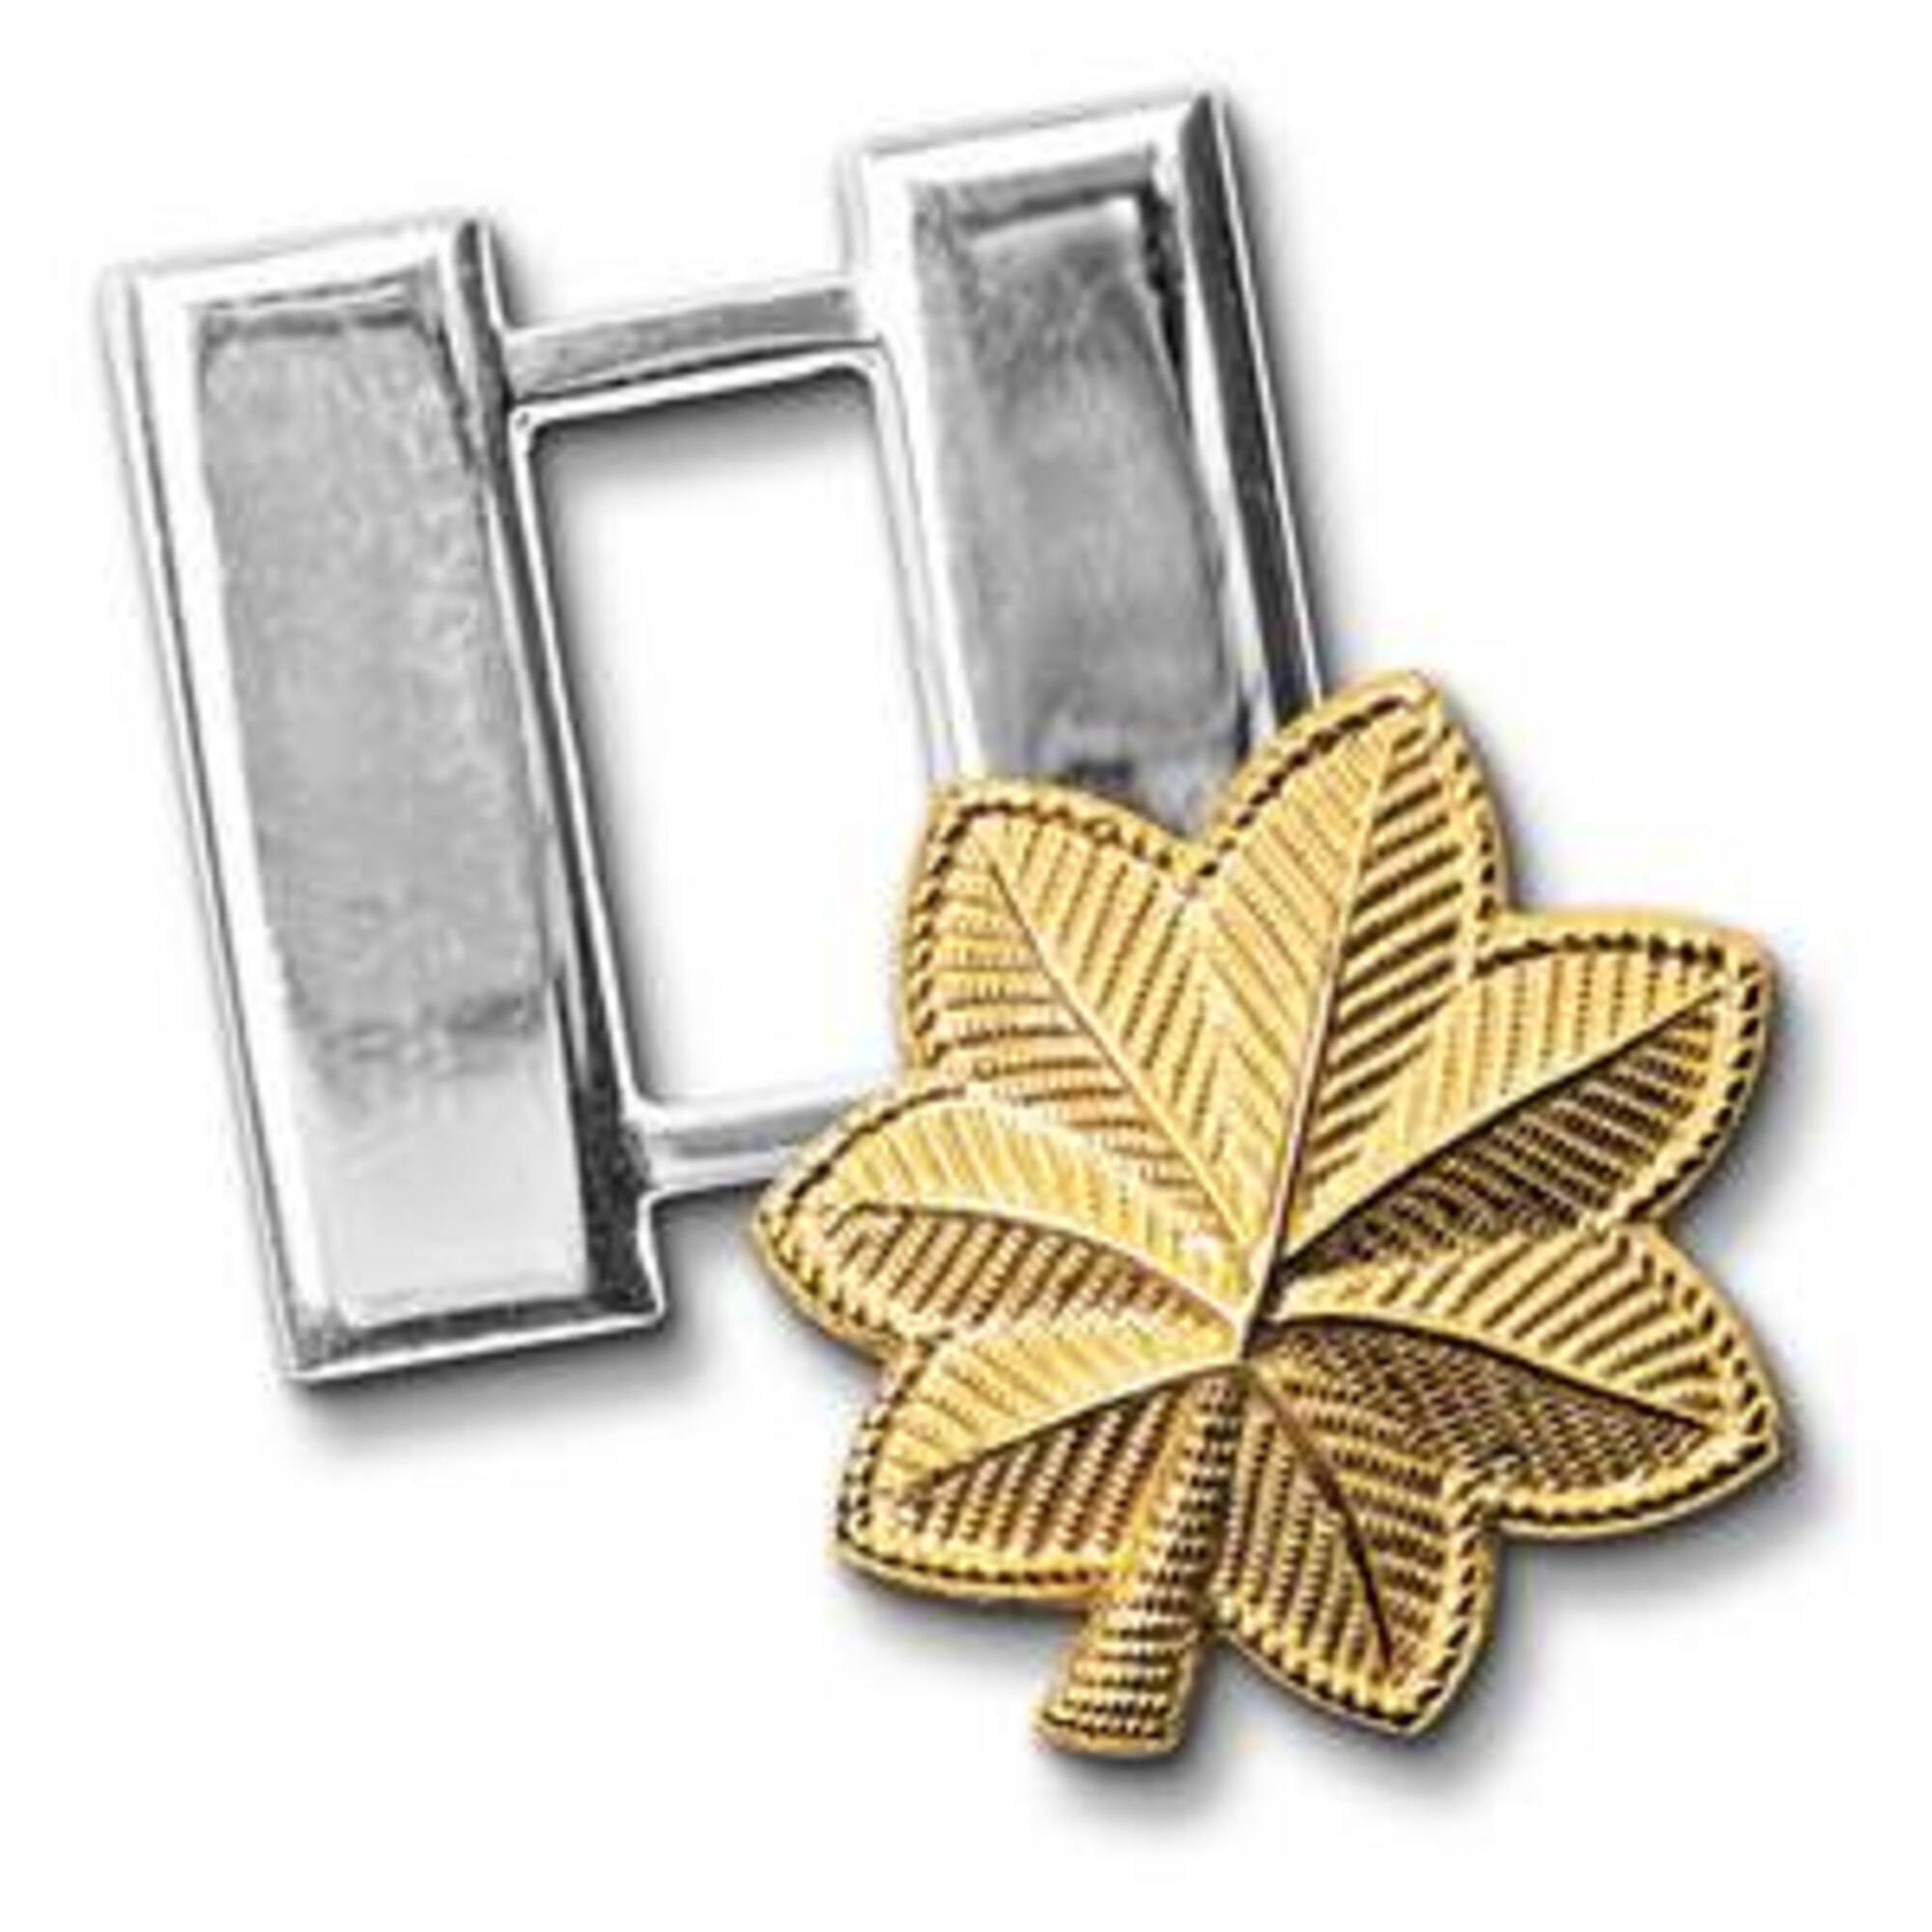 The Air Force released the names of 17 Ellsworth Airmen who will be trading in their silver bars for golden oak leafs in a news story Jan. 28. (U.S. Army graphic)